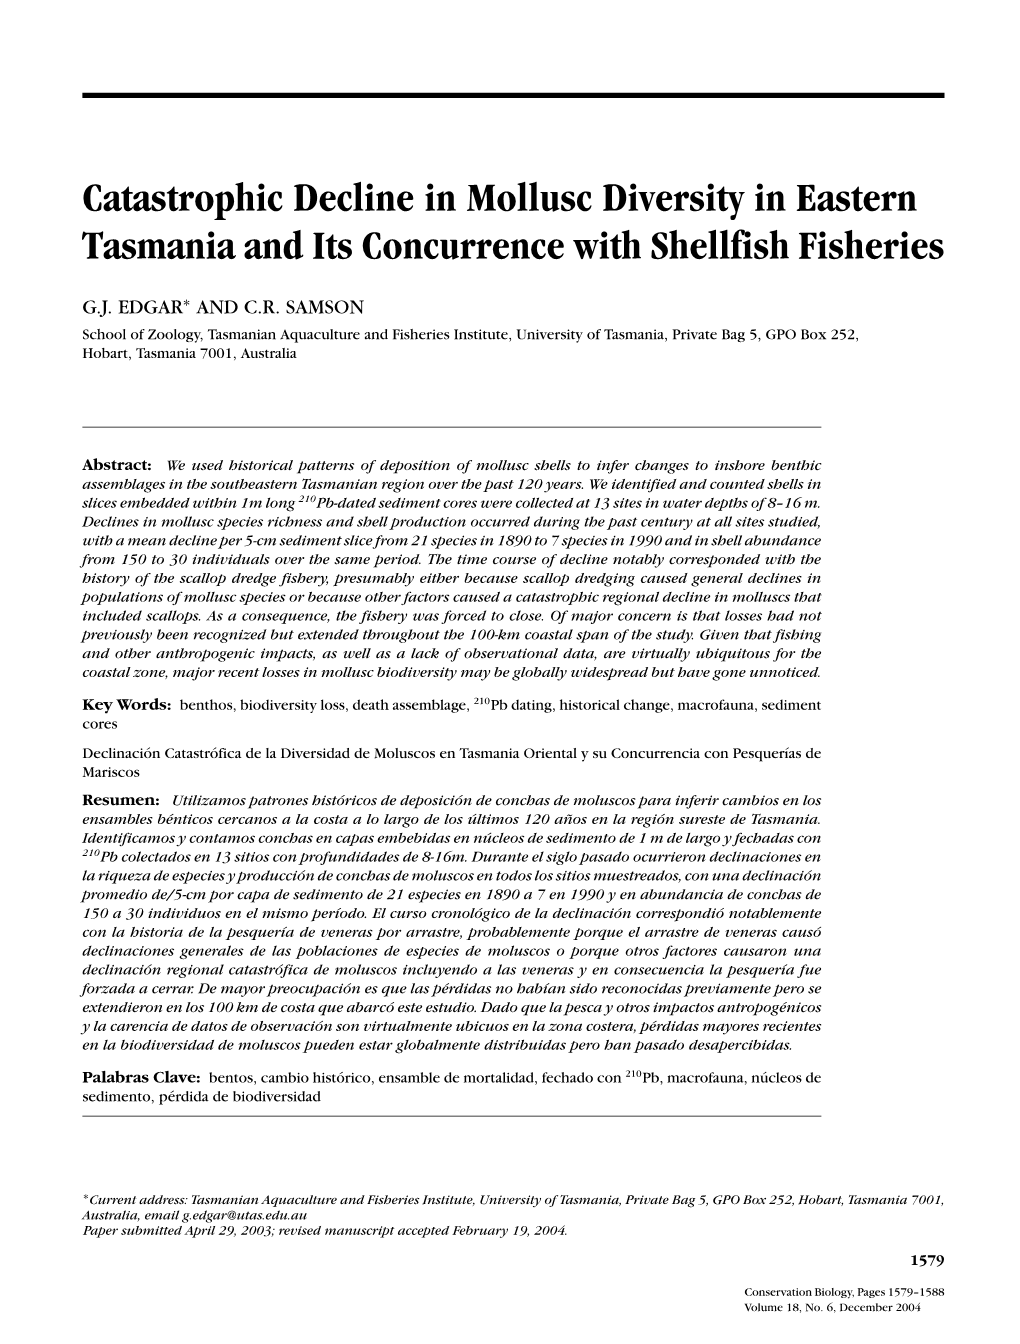 Catastrophic Decline in Mollusc Diversity in Eastern Tasmania and Its Concurrence with Shellfish Fisheries